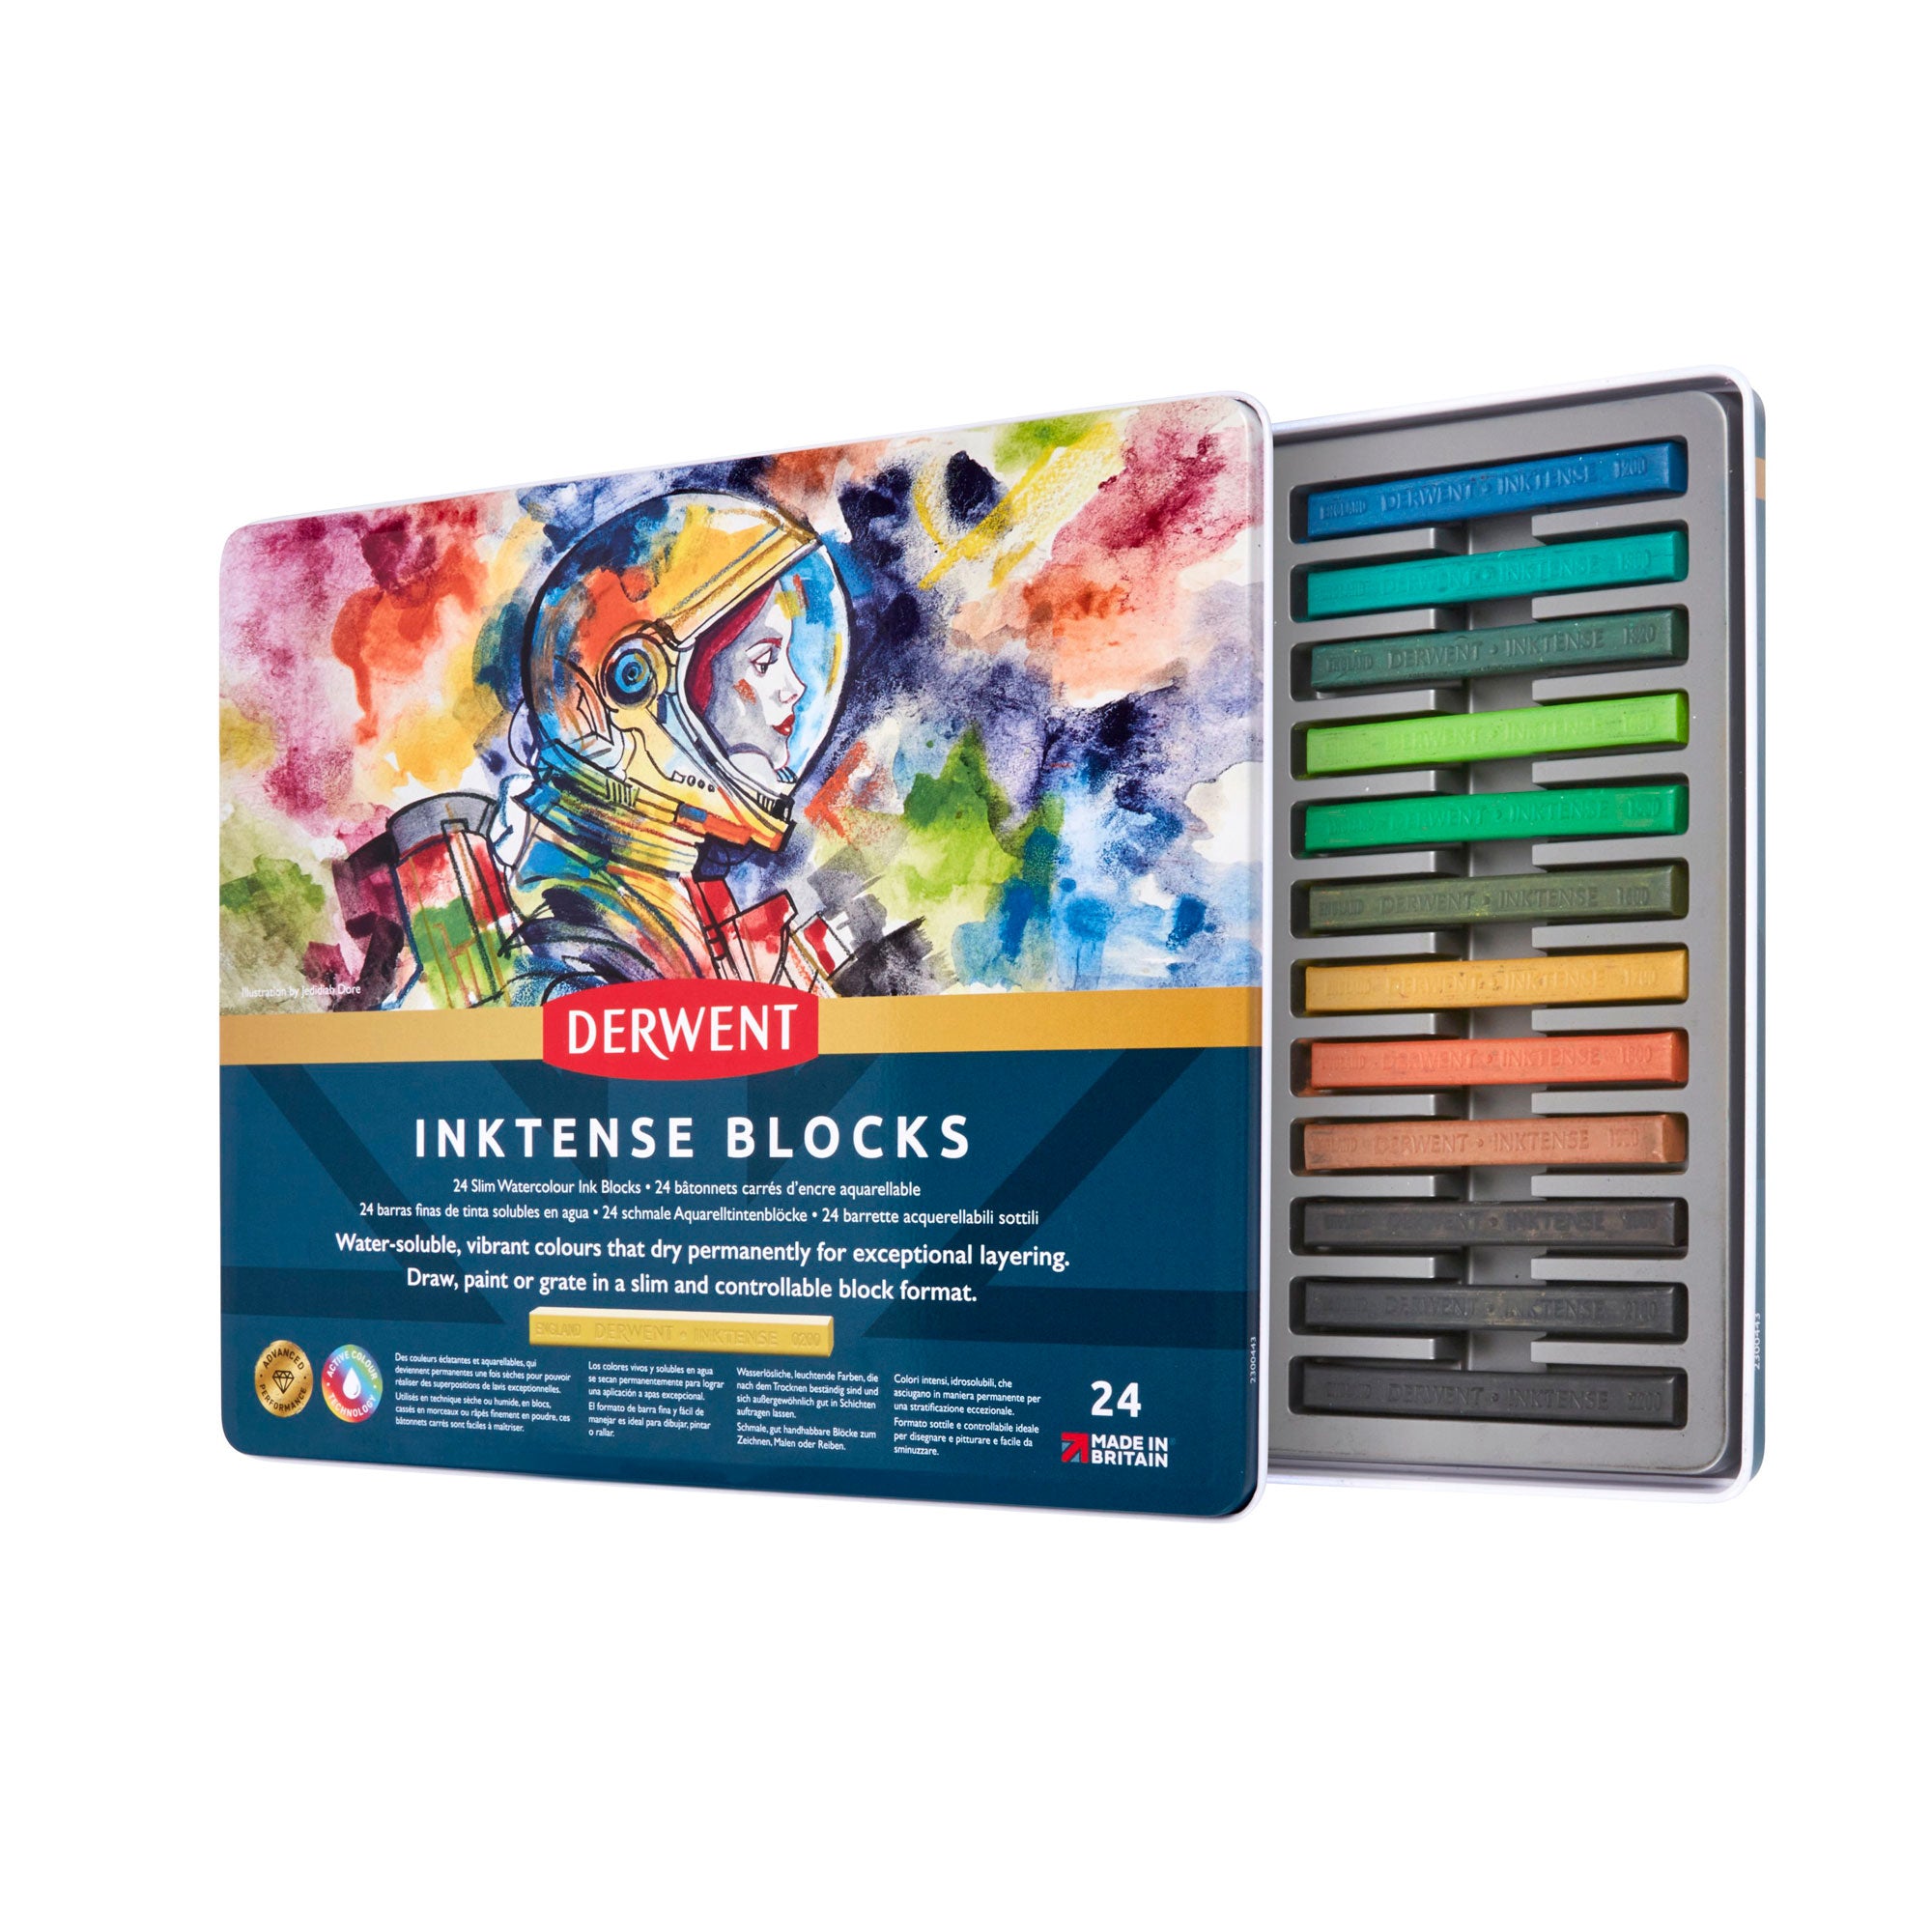 These Derwent Inktense Block Metal Tin Sets feature the brilliance of their Inktense pencils but in a slim block making it easy to cover large areas really quickly.